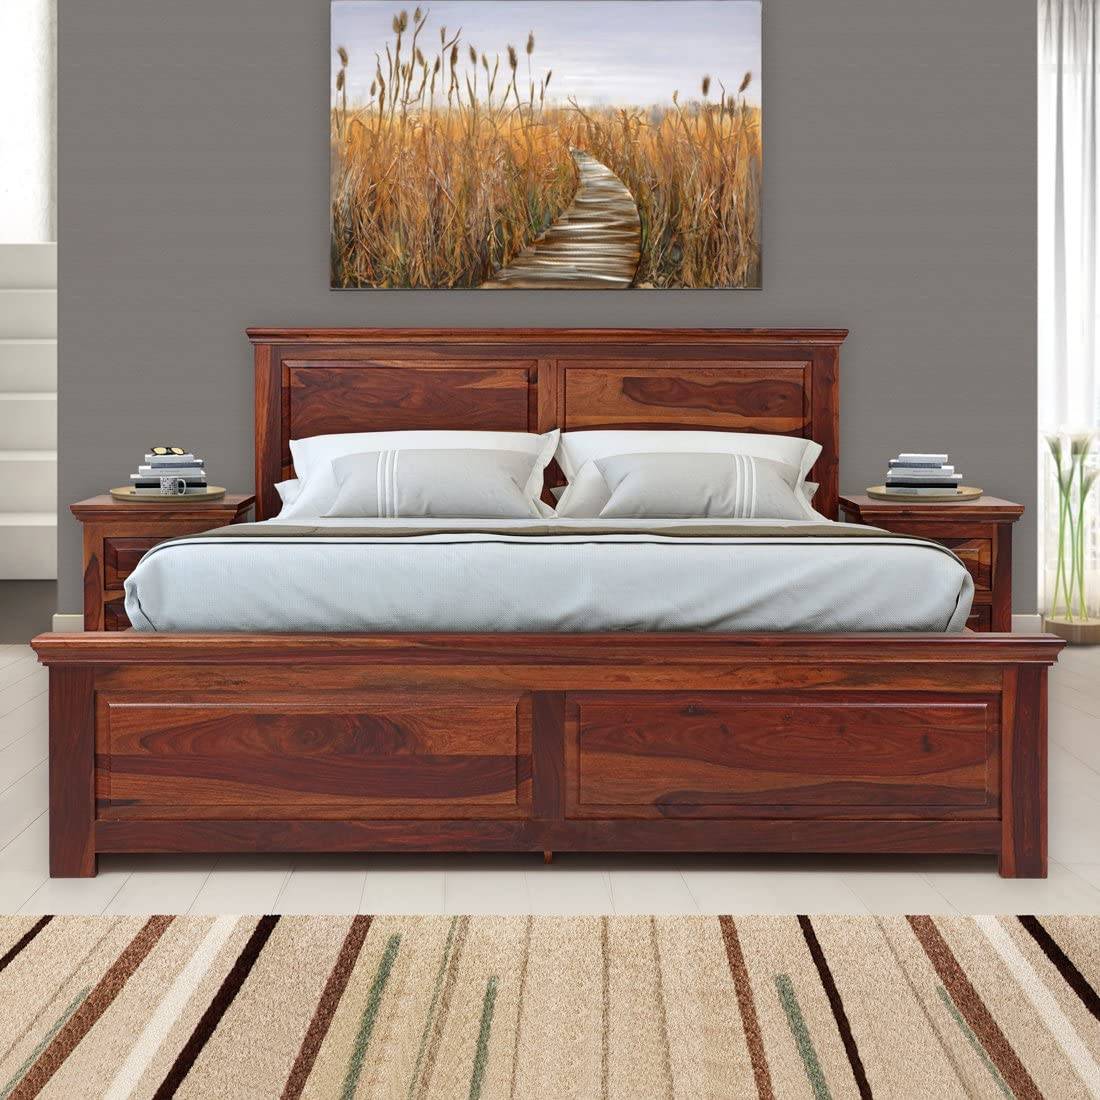 Rose Wood Double Bed with Storage in Walnut Finish » Buy Wooden Furniture  Online at Best Price